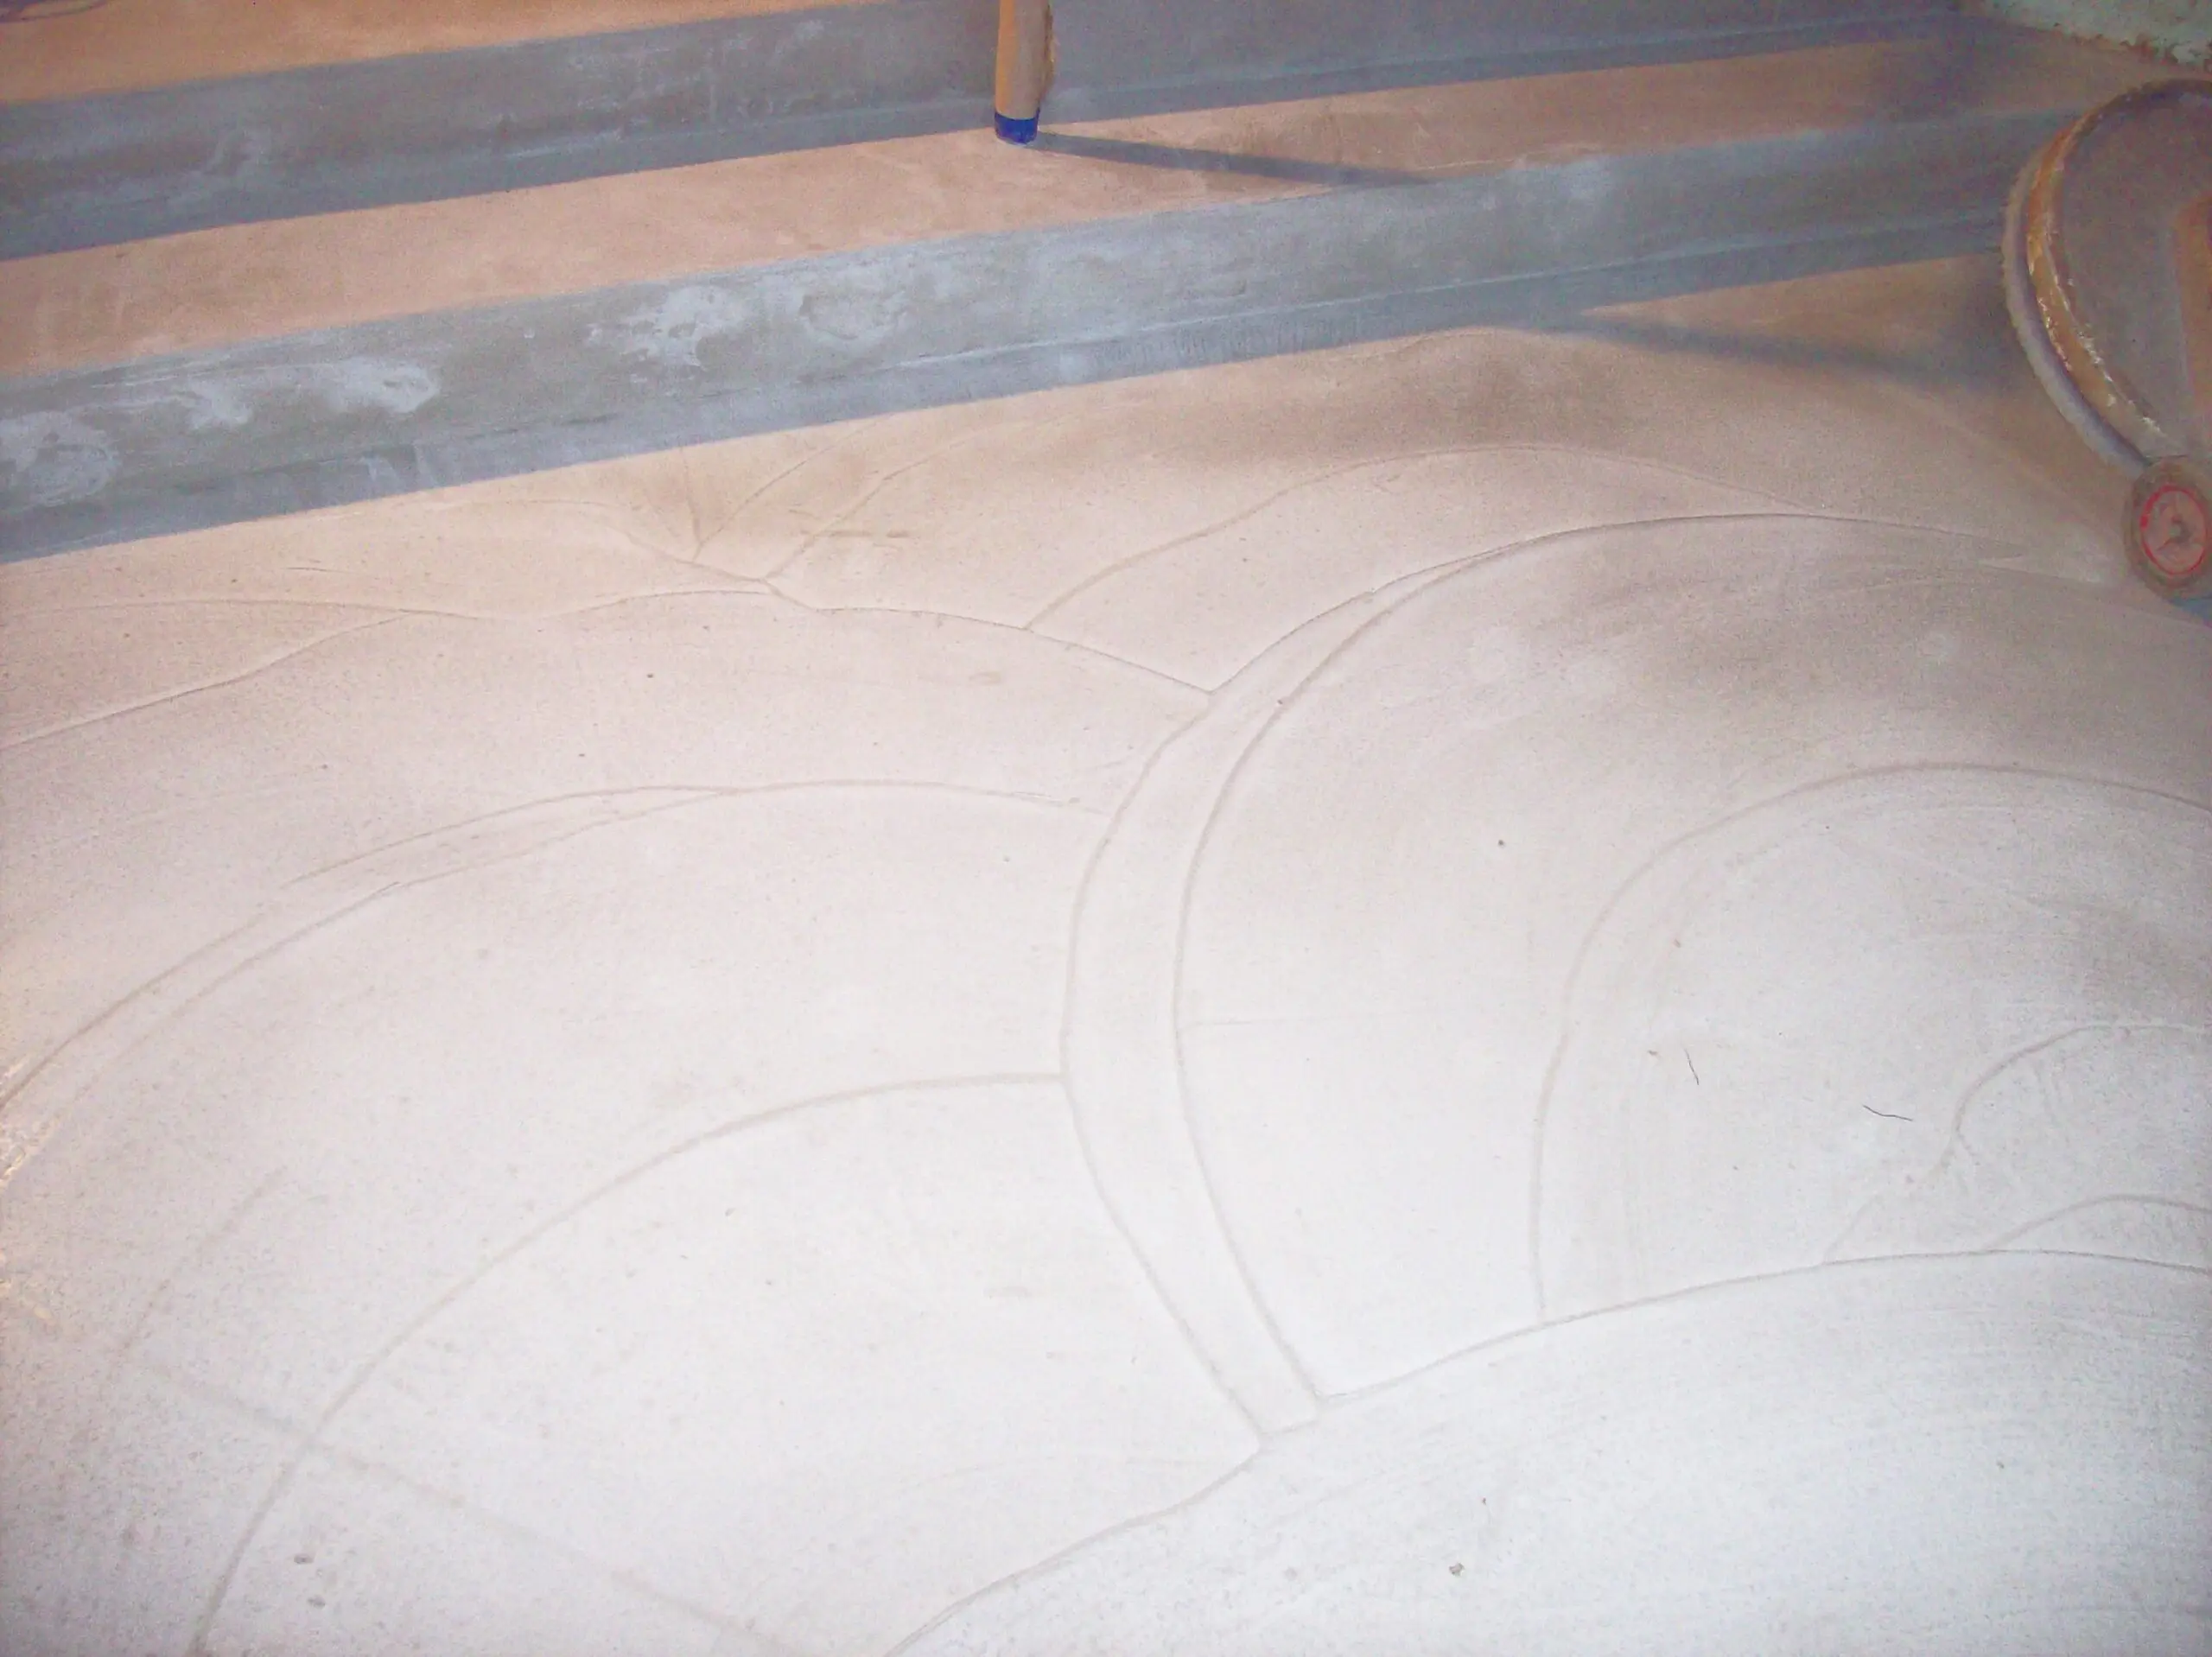 Using a trowel to create a swirling pattern on the surface of the wet concrete overlay